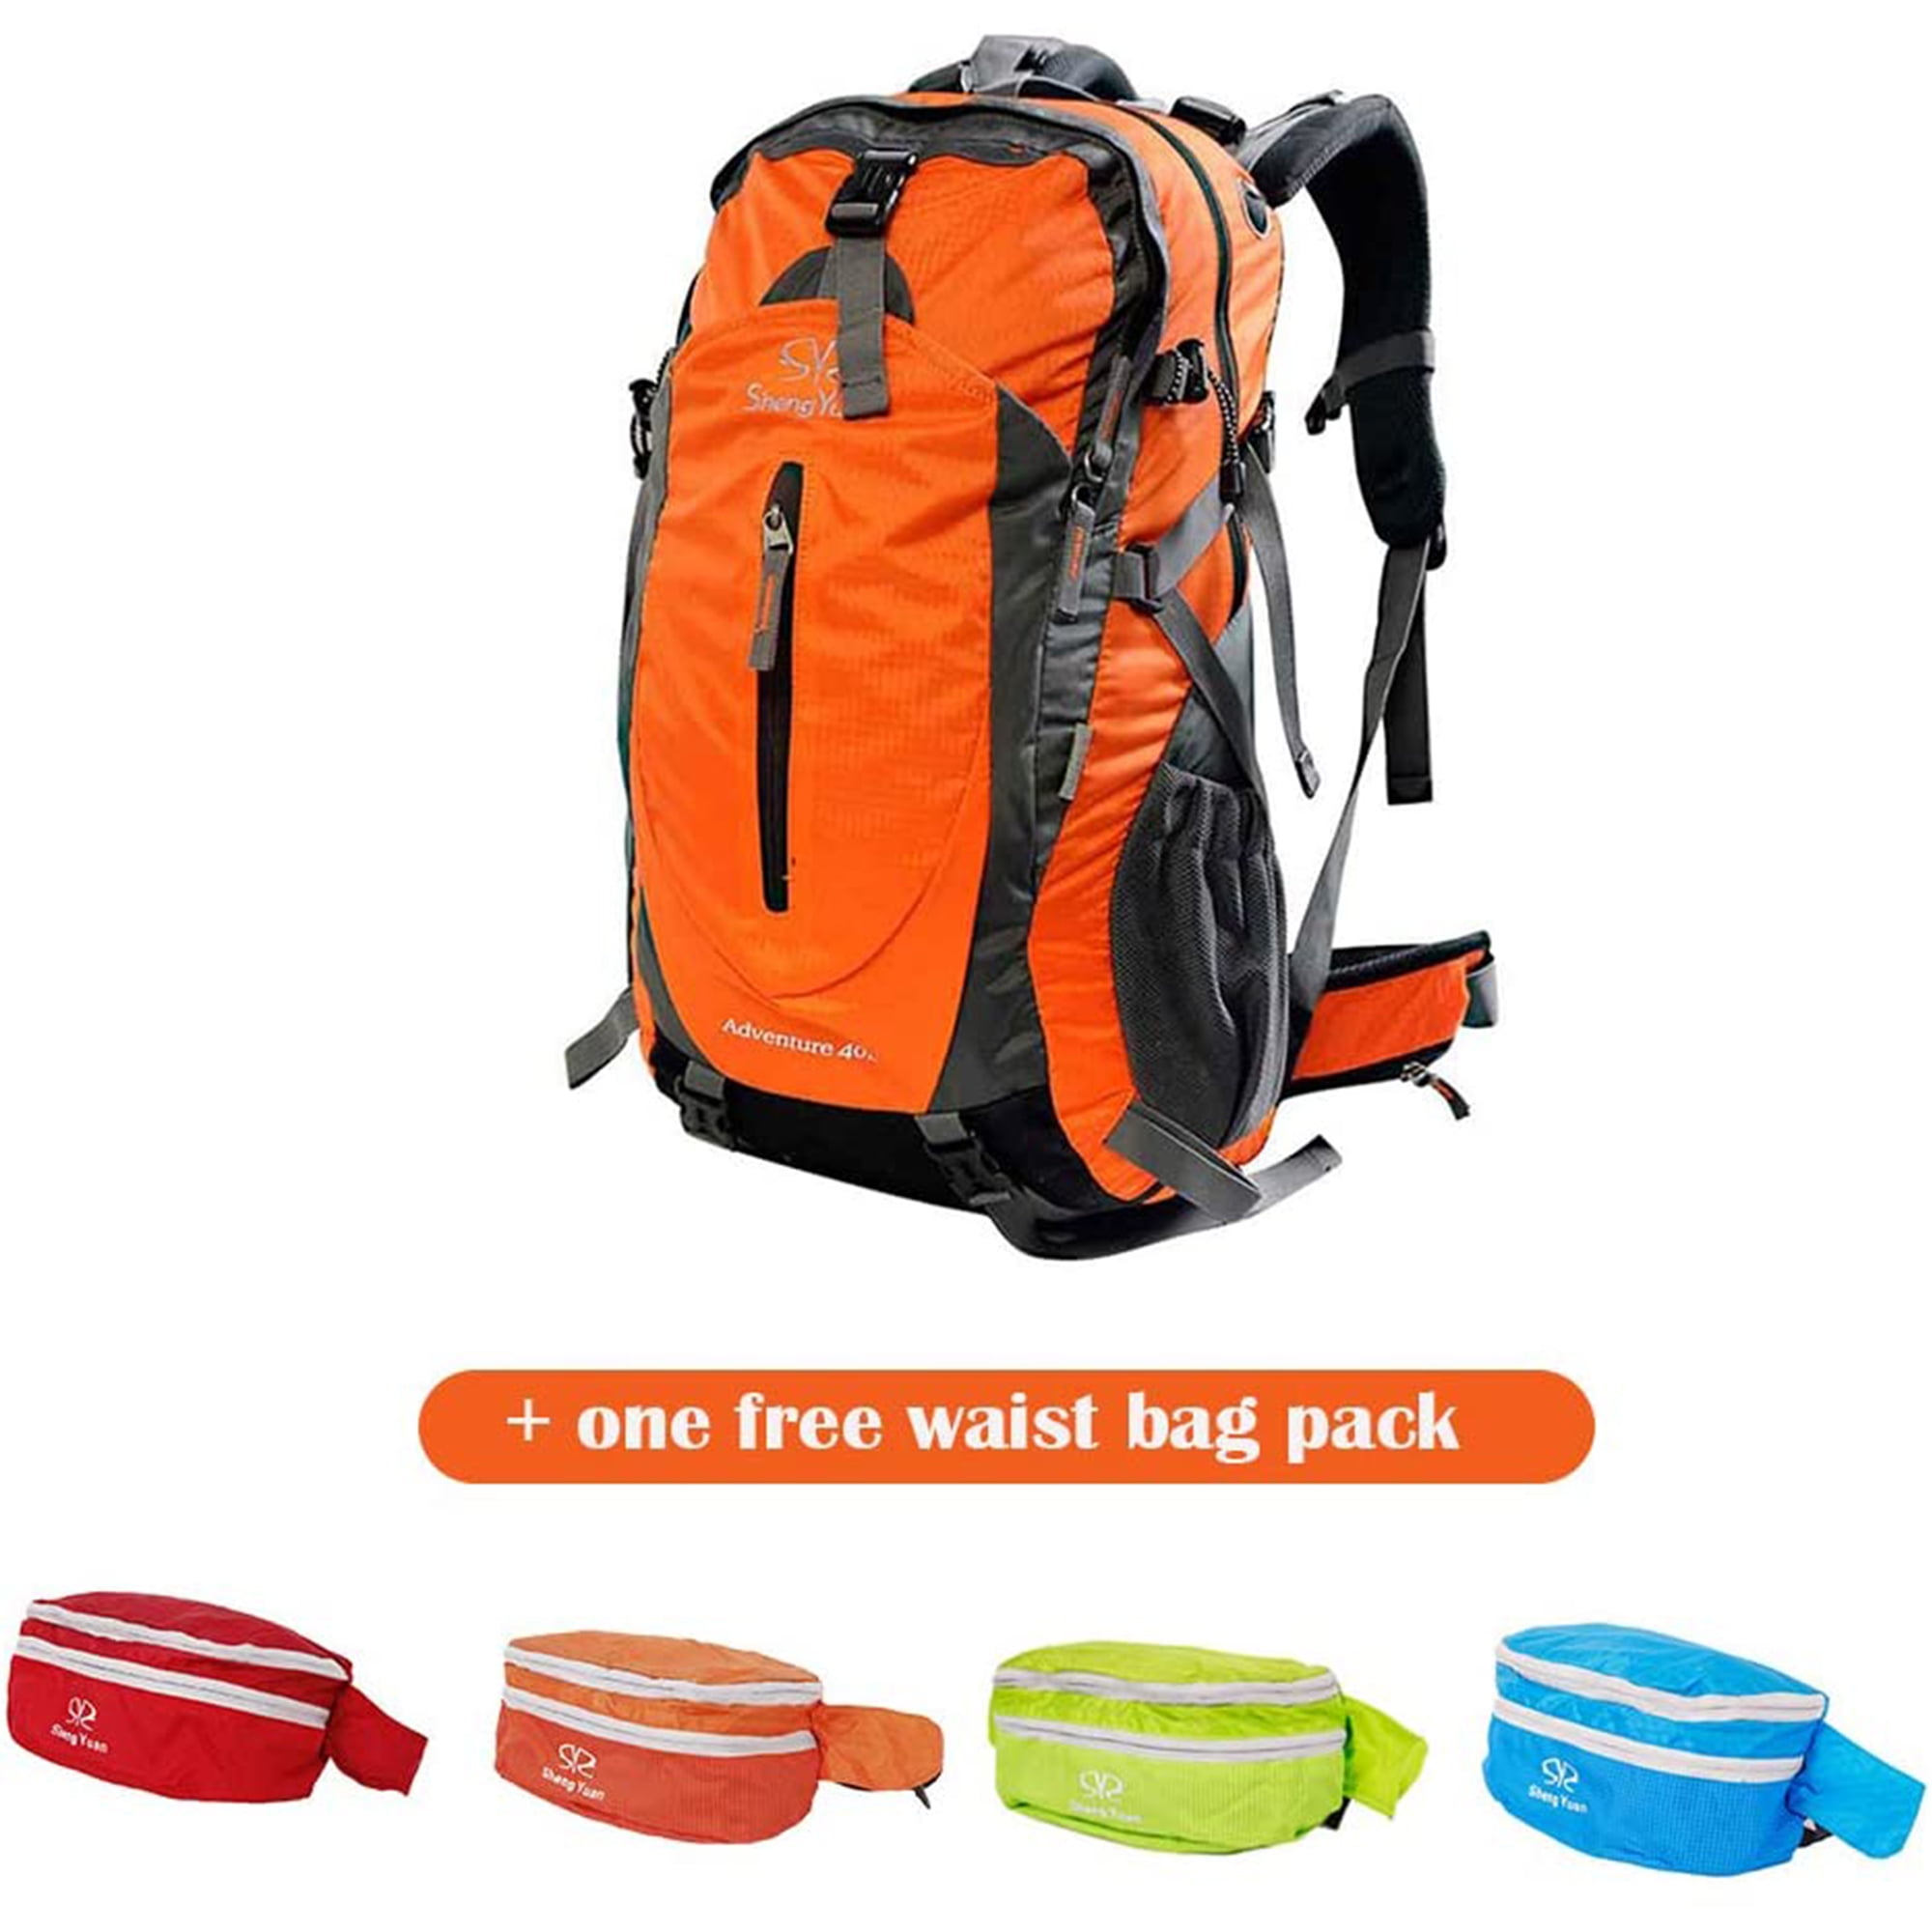 Packable Hiking Backpack WOOMADA 35L 40L Lightweight Water Resistant Nylon Backpack Outdoor Travel Hiking Daypack 